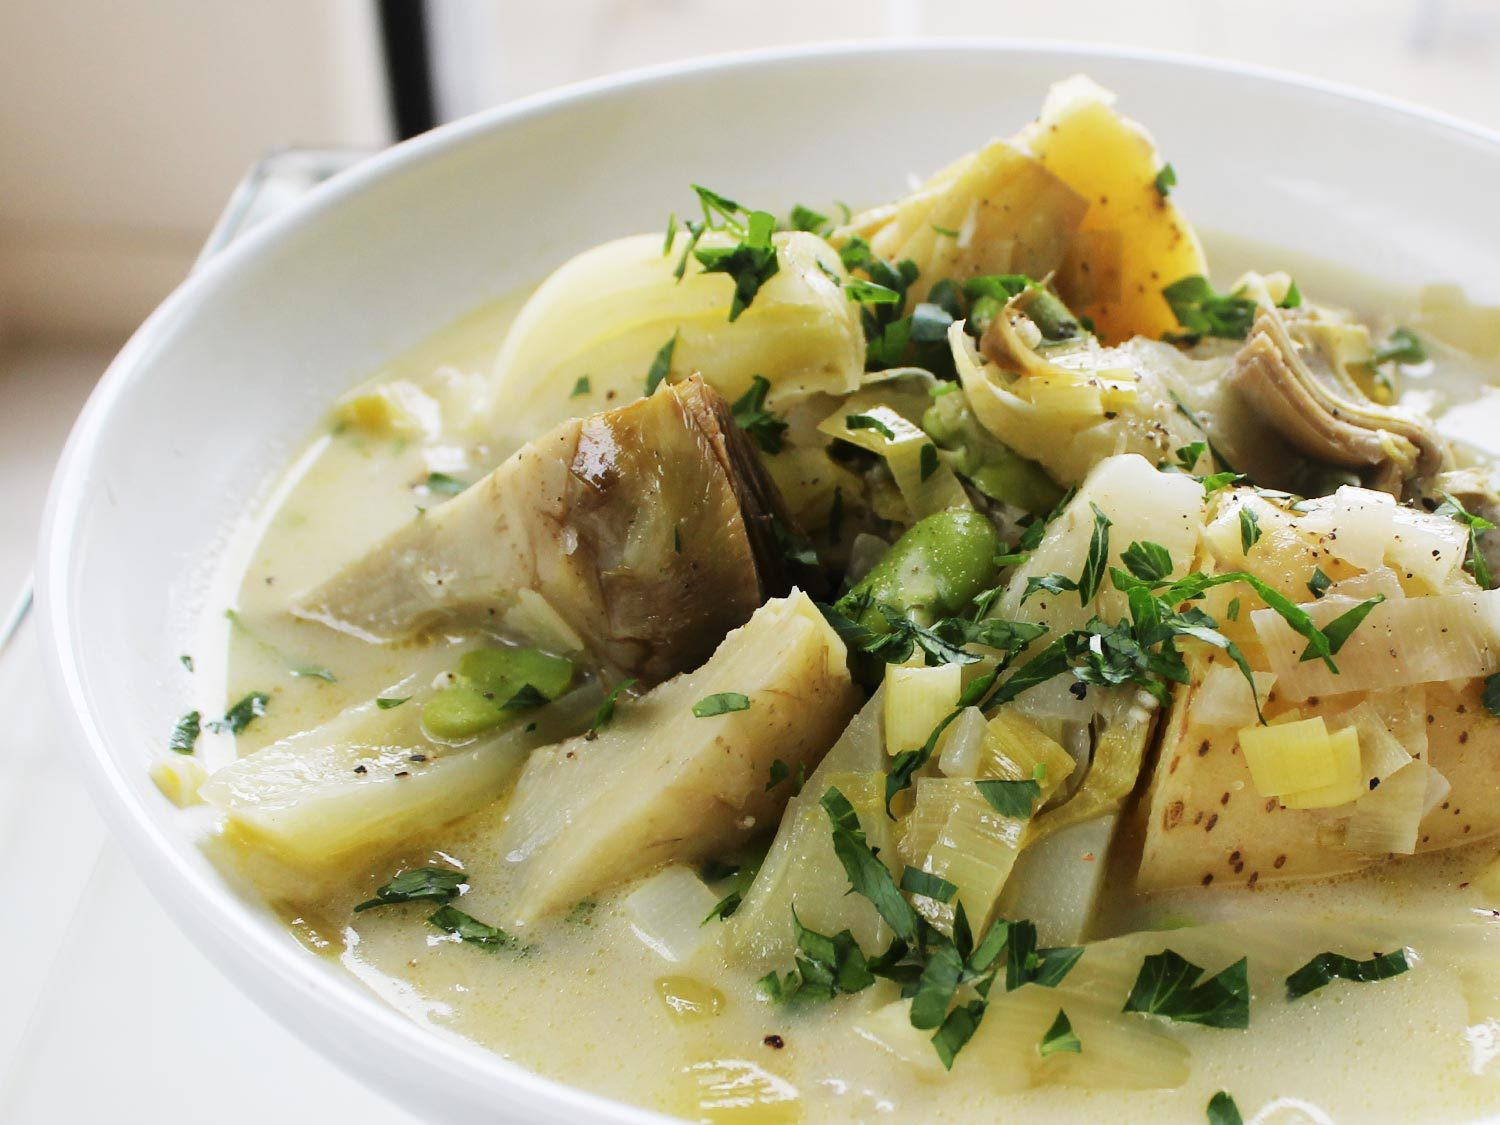 Vegan Leek Recipes
 Braised Artichokes With Leeks and Peas From The New